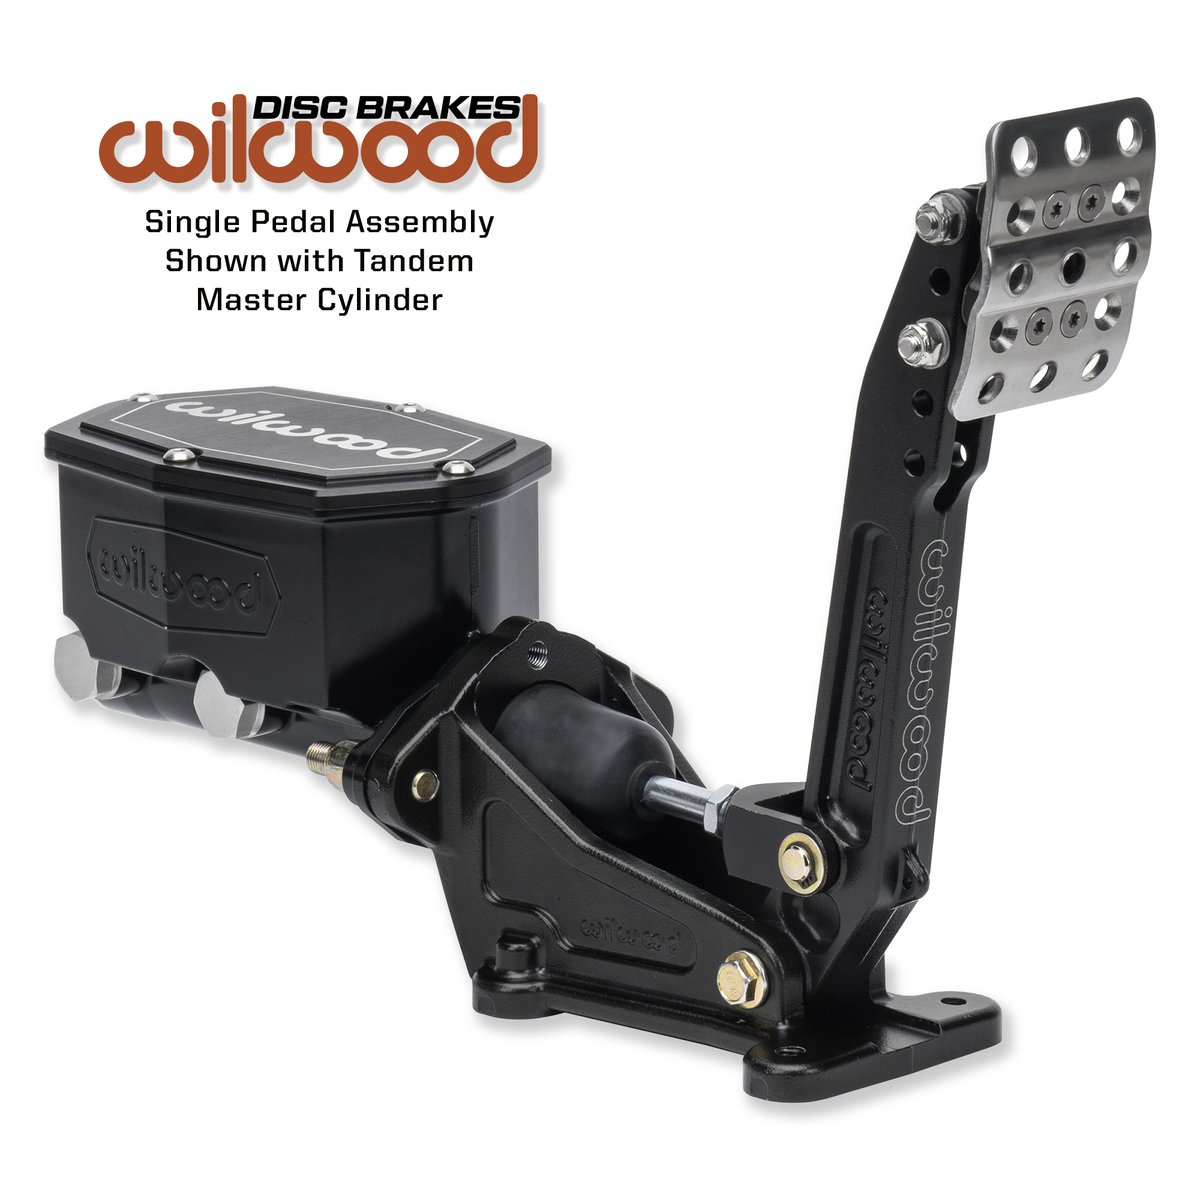 Now available! Newly designed pedal assembly bases to accommodate the popular Tandem Master Cylinder lineup for both floor or swing mount applications. For more info check out our website at wilwood.com #Wilwood #WilwoodDiscBrakes #Pedals #mastercylinder #Assembly